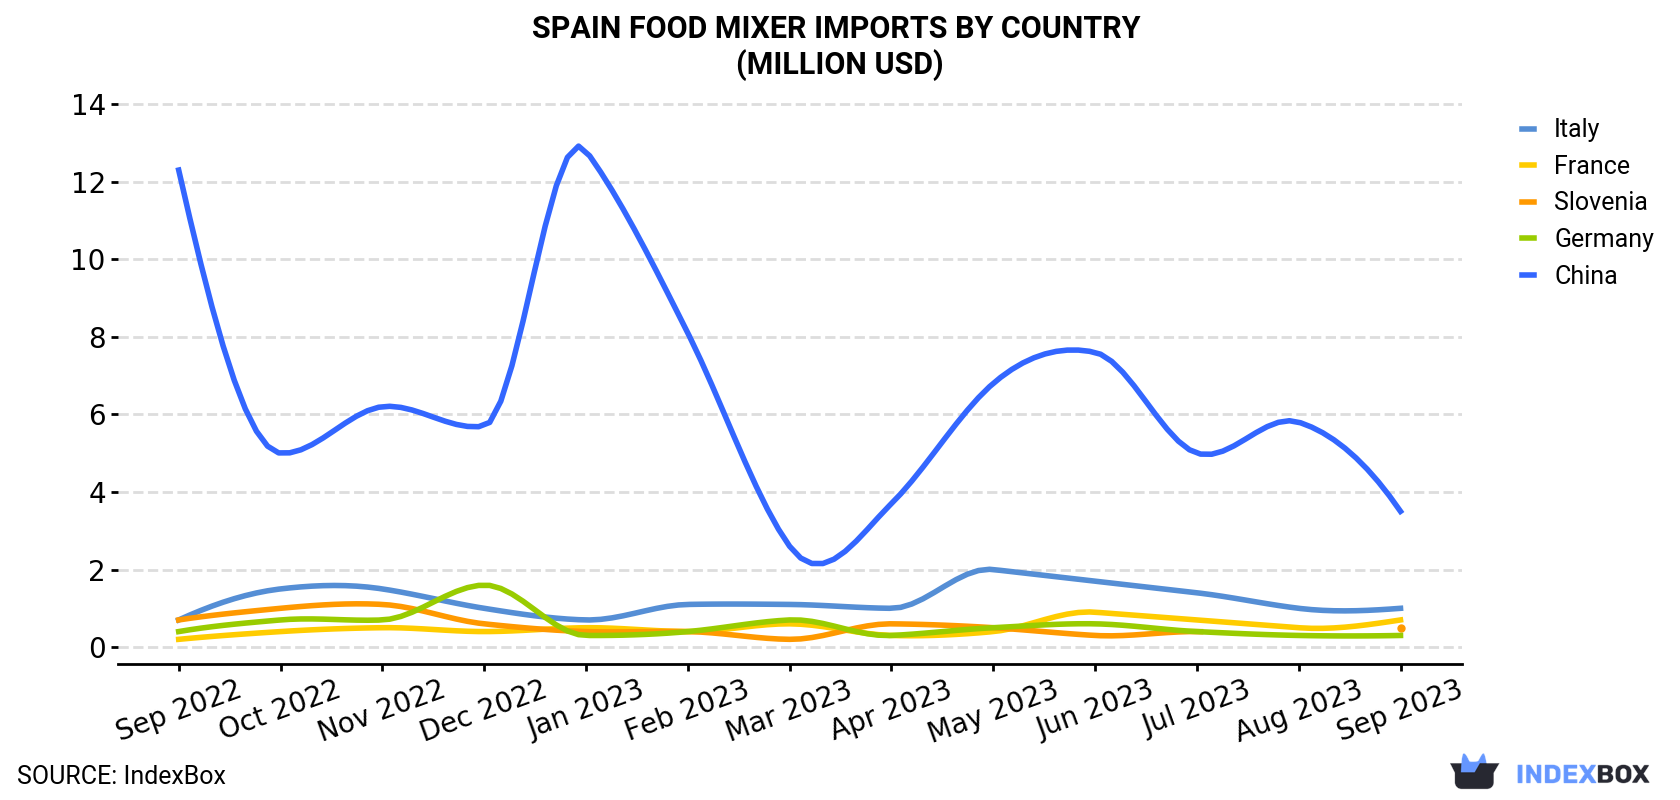 Spain Food Mixer Imports By Country (Million USD)